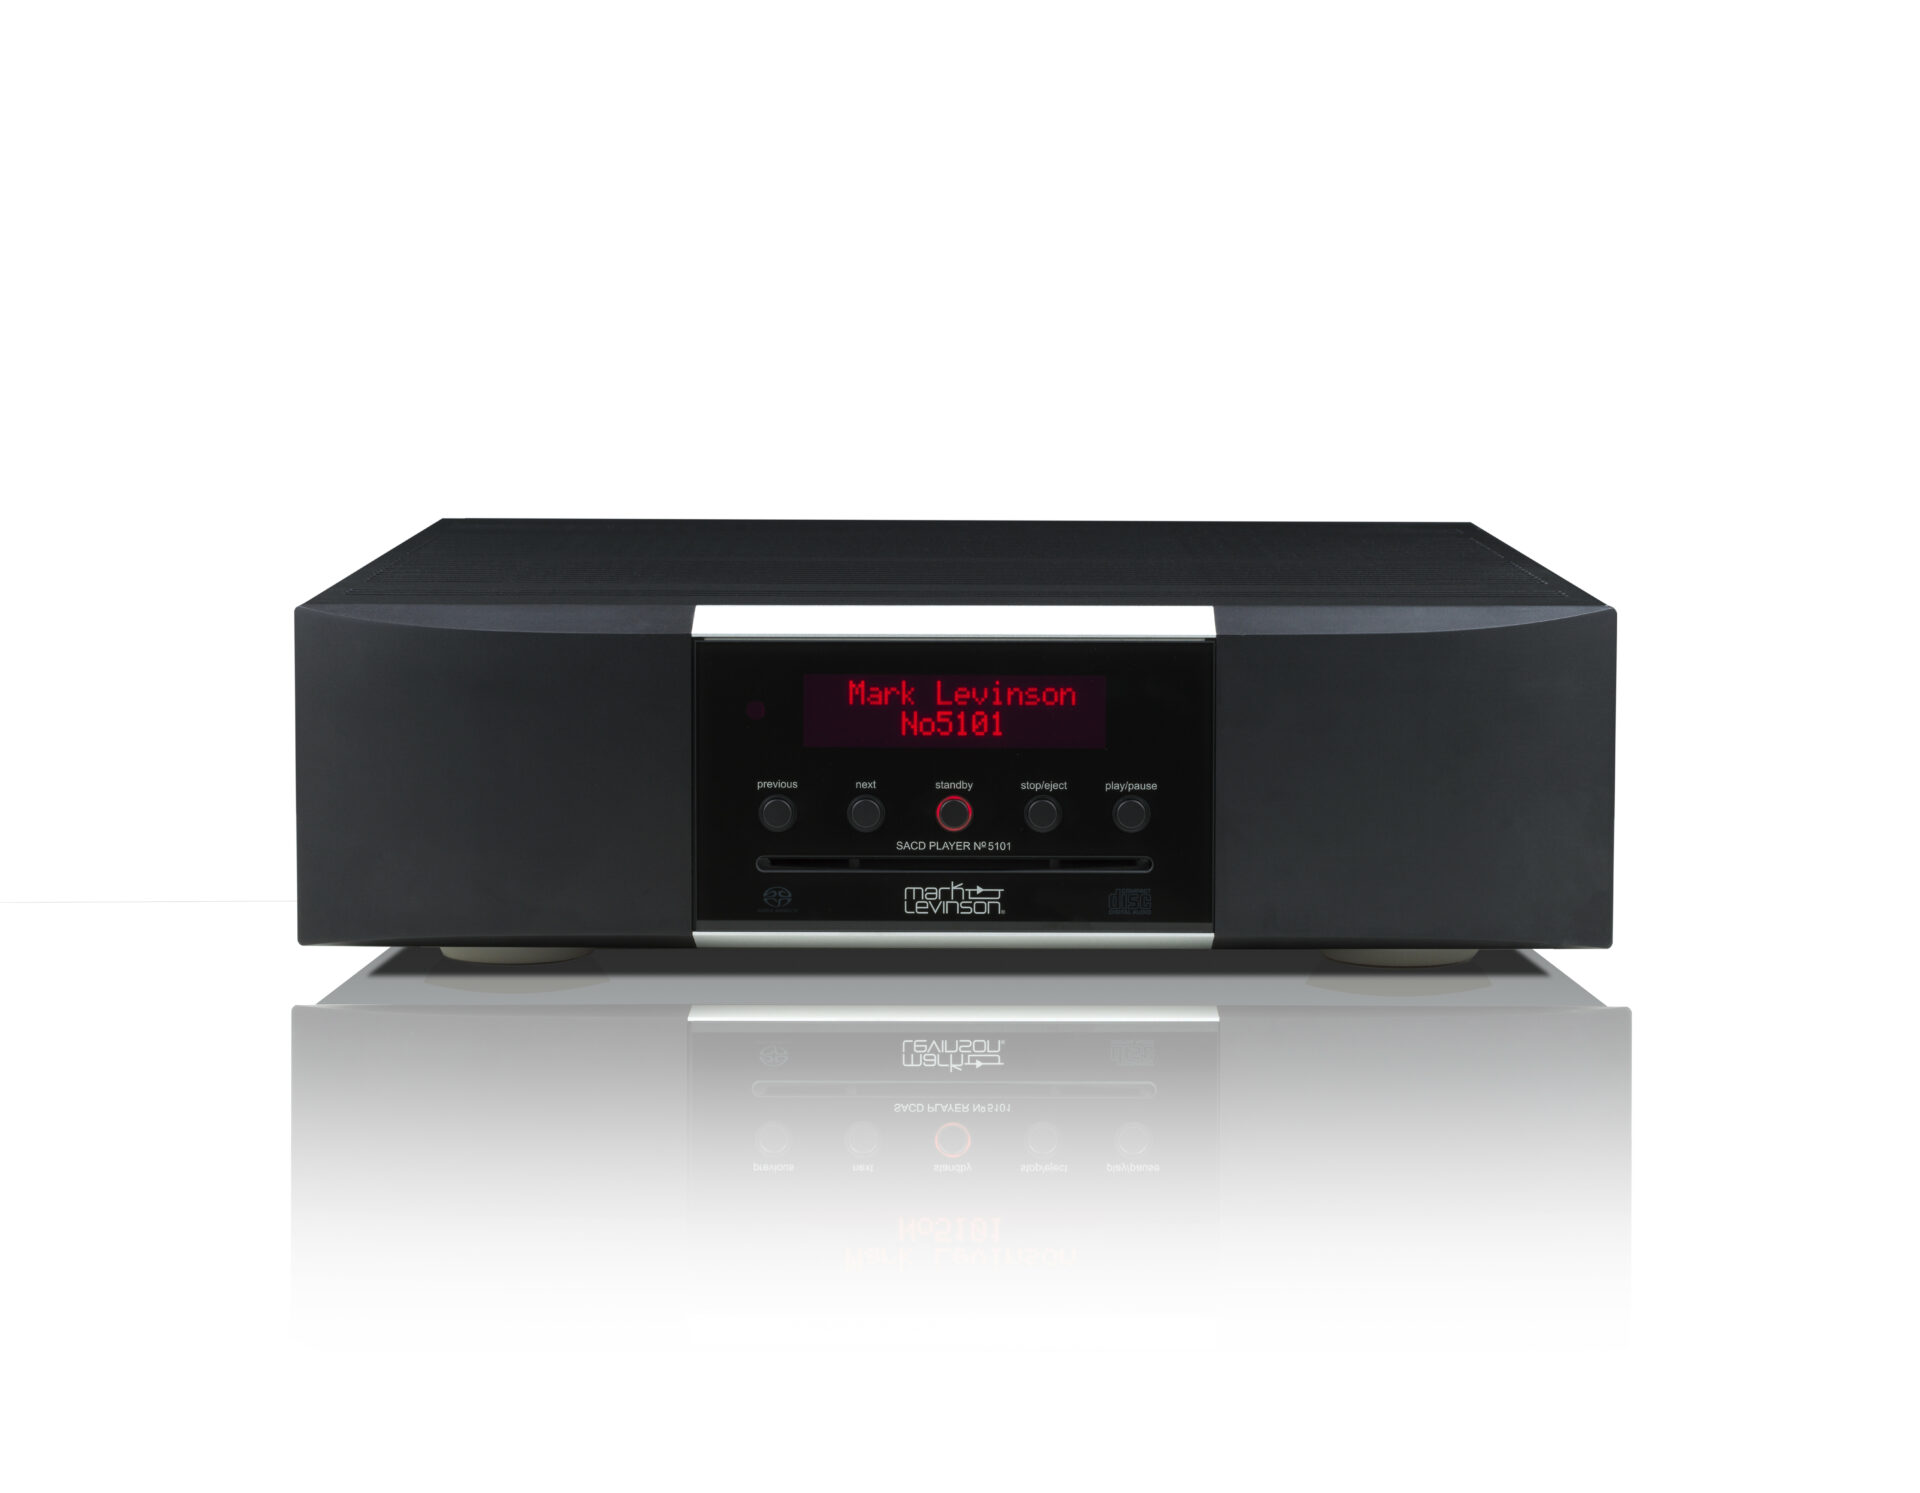 Mark Levinson No 5101 Network Streaming SACD Player and DAC, No 5206 Preamplifier, and No 5302 Power Amplifier